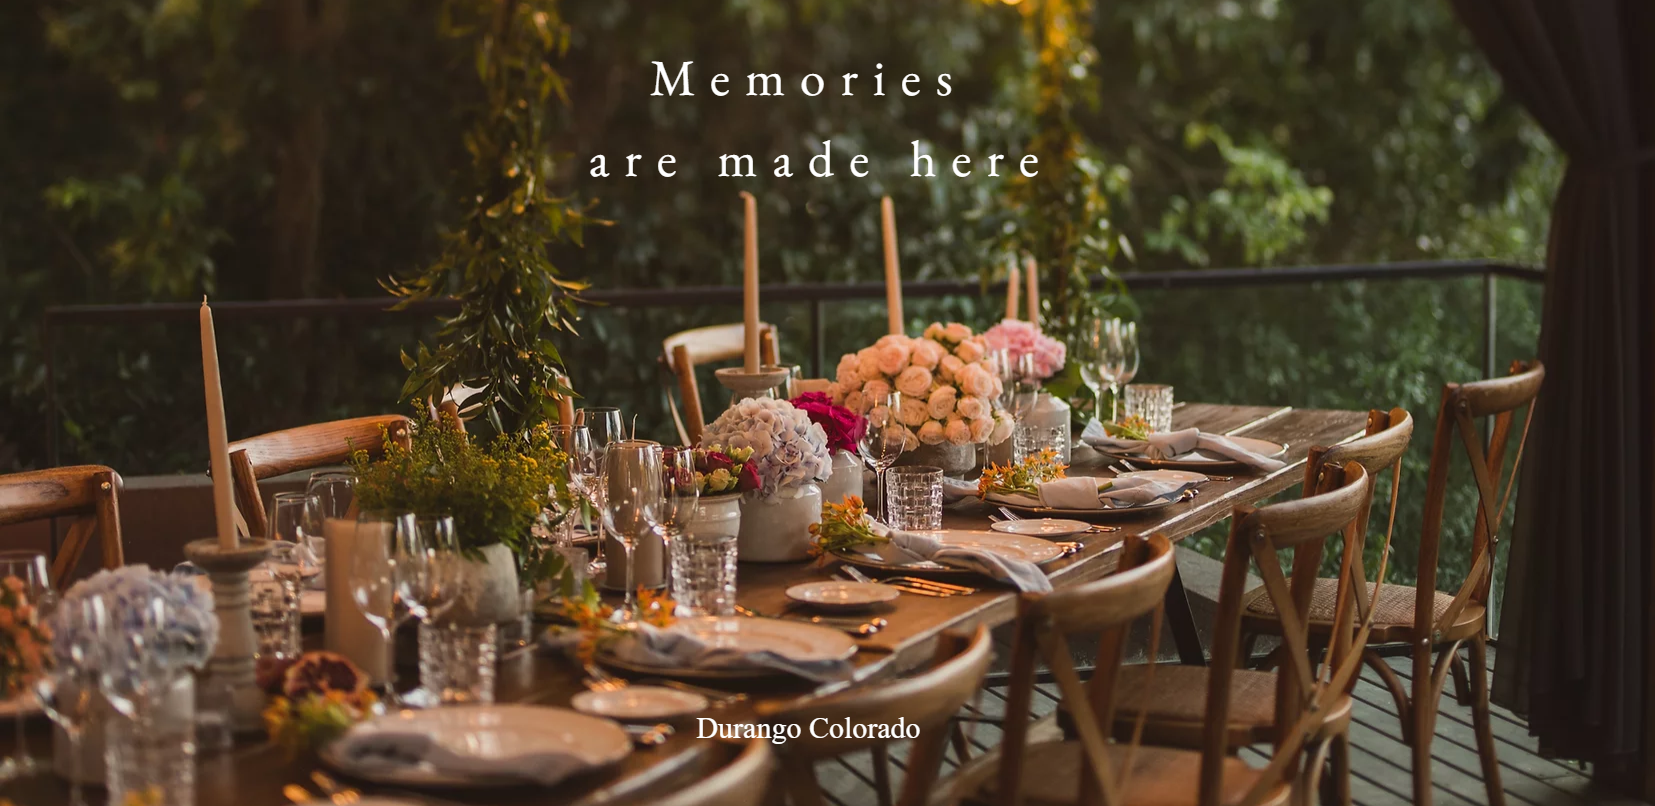 Looking for the perfect venue to host a special occassion? Look no further! Rooftop venue overlooking the beautiful Animas River just minutes from historic Downtown Durango.